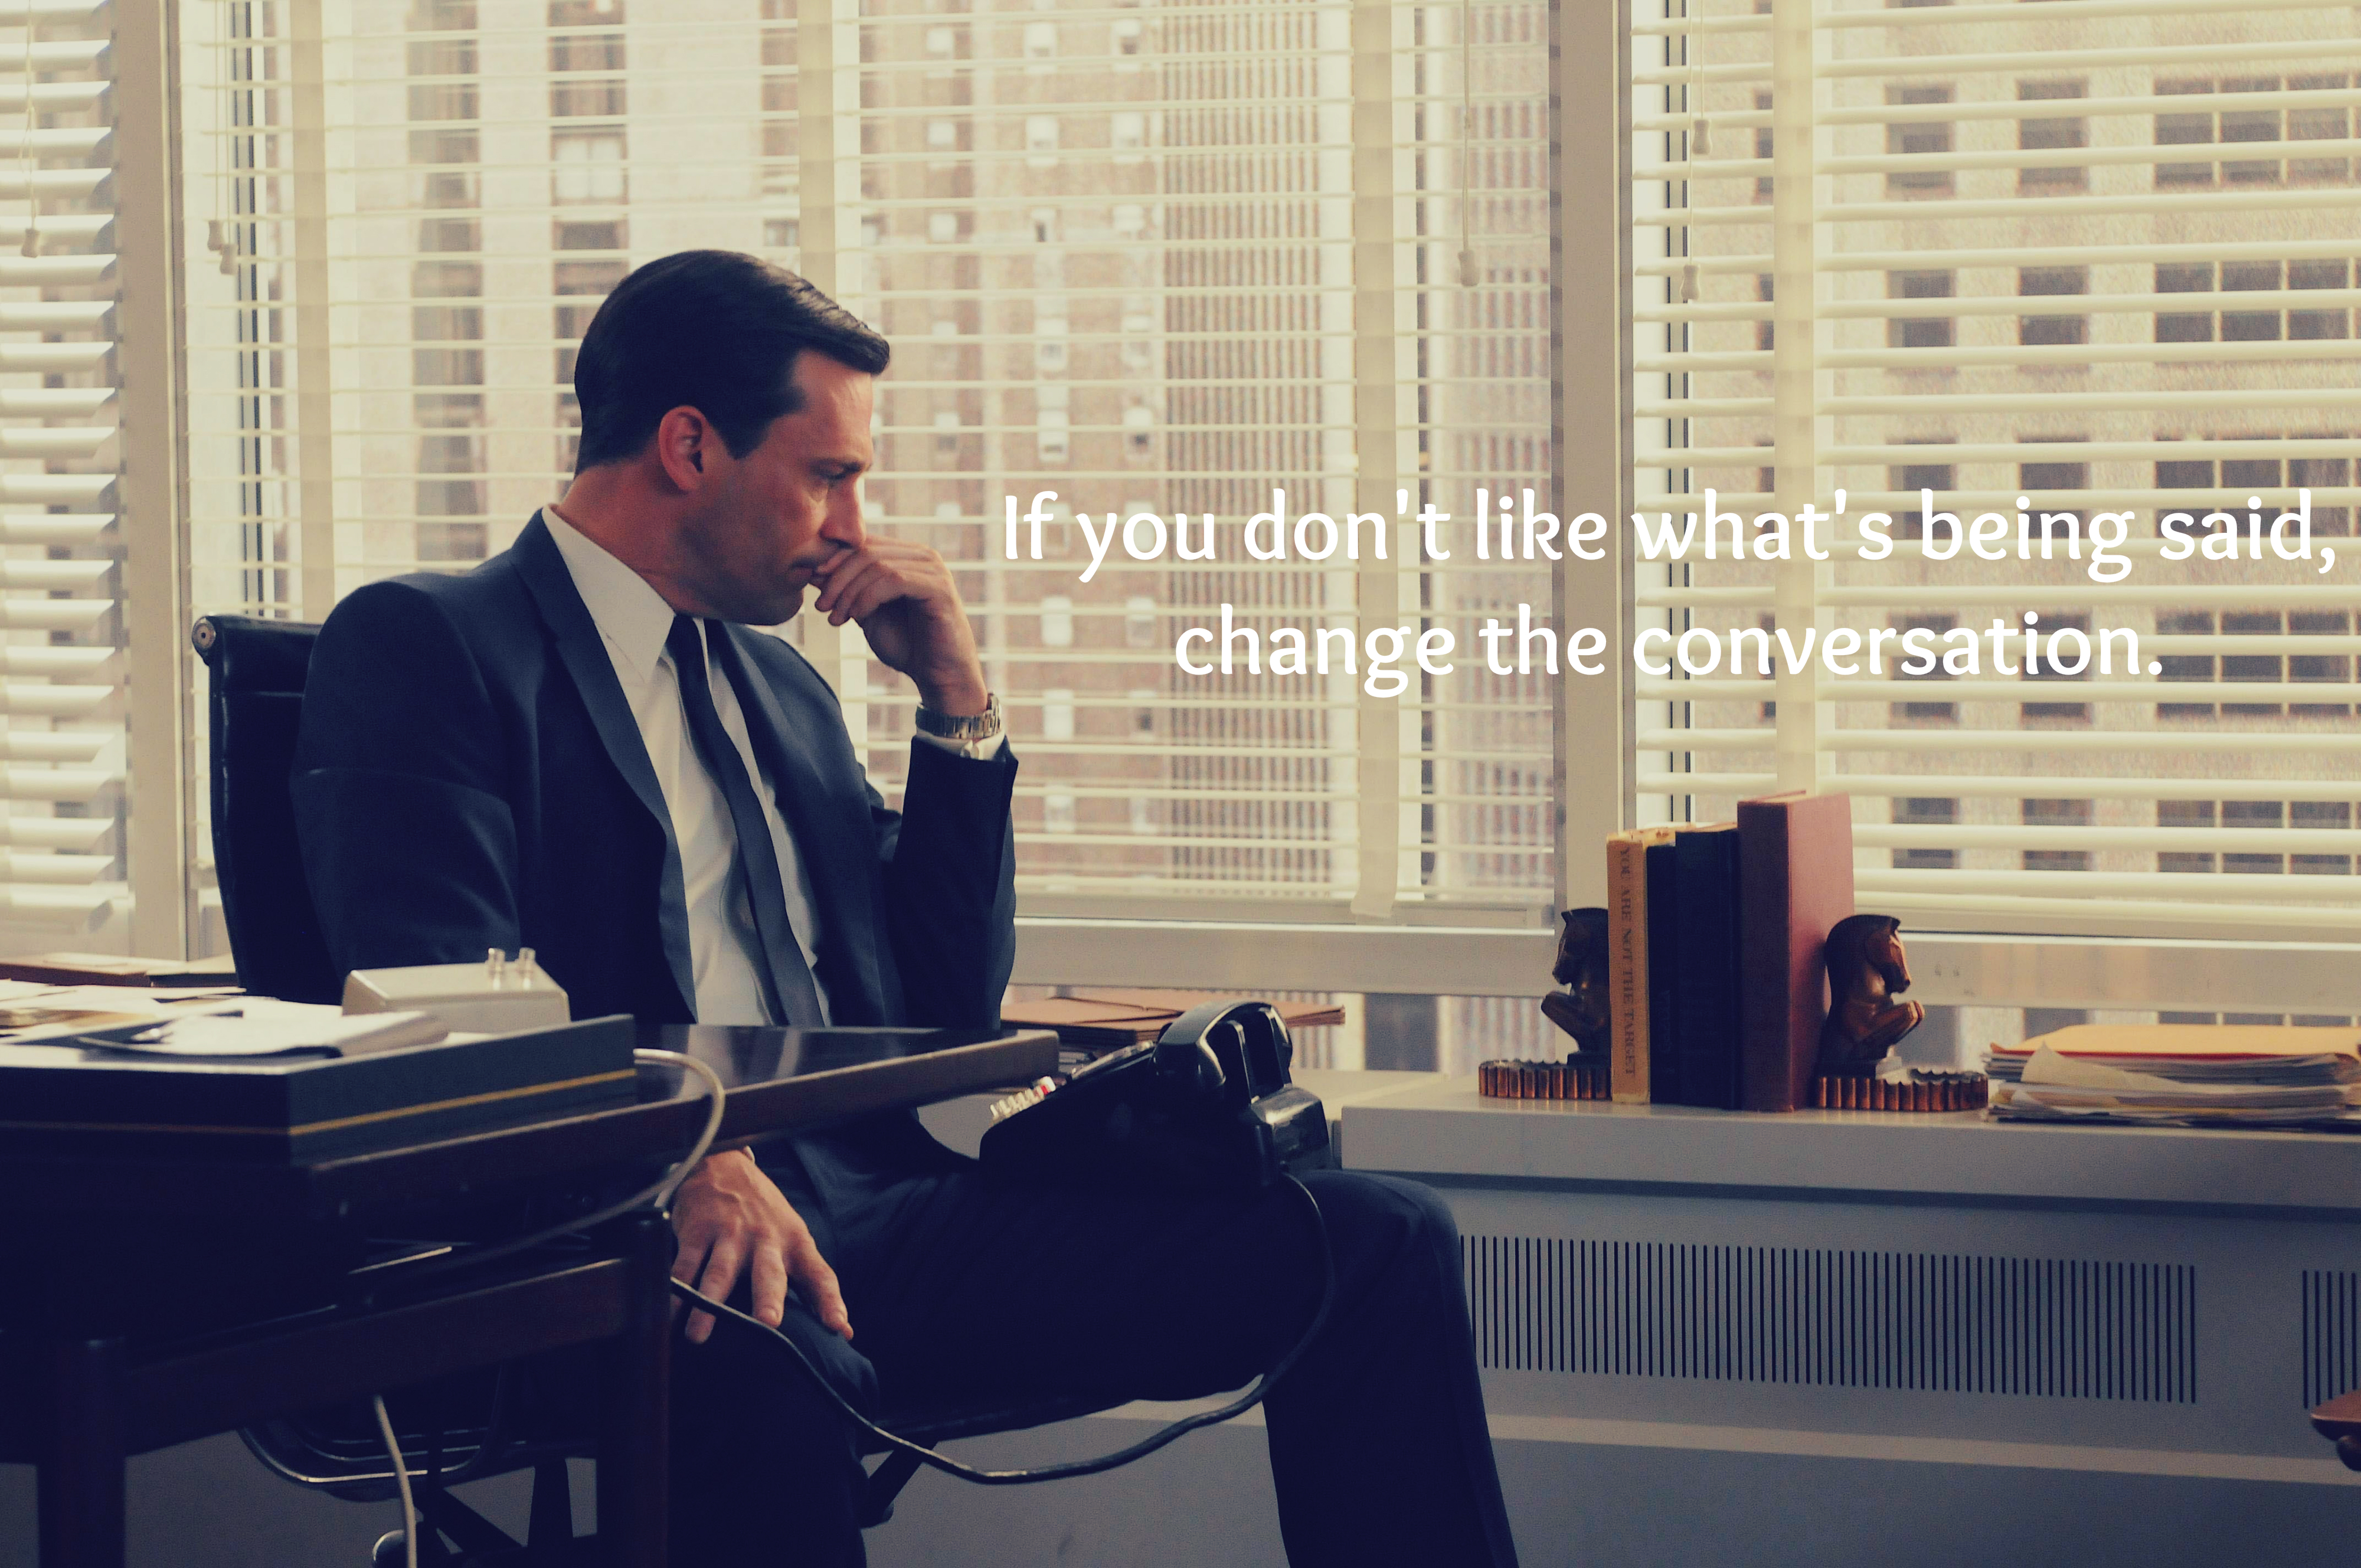 Don Draper Quotes Wallpapers